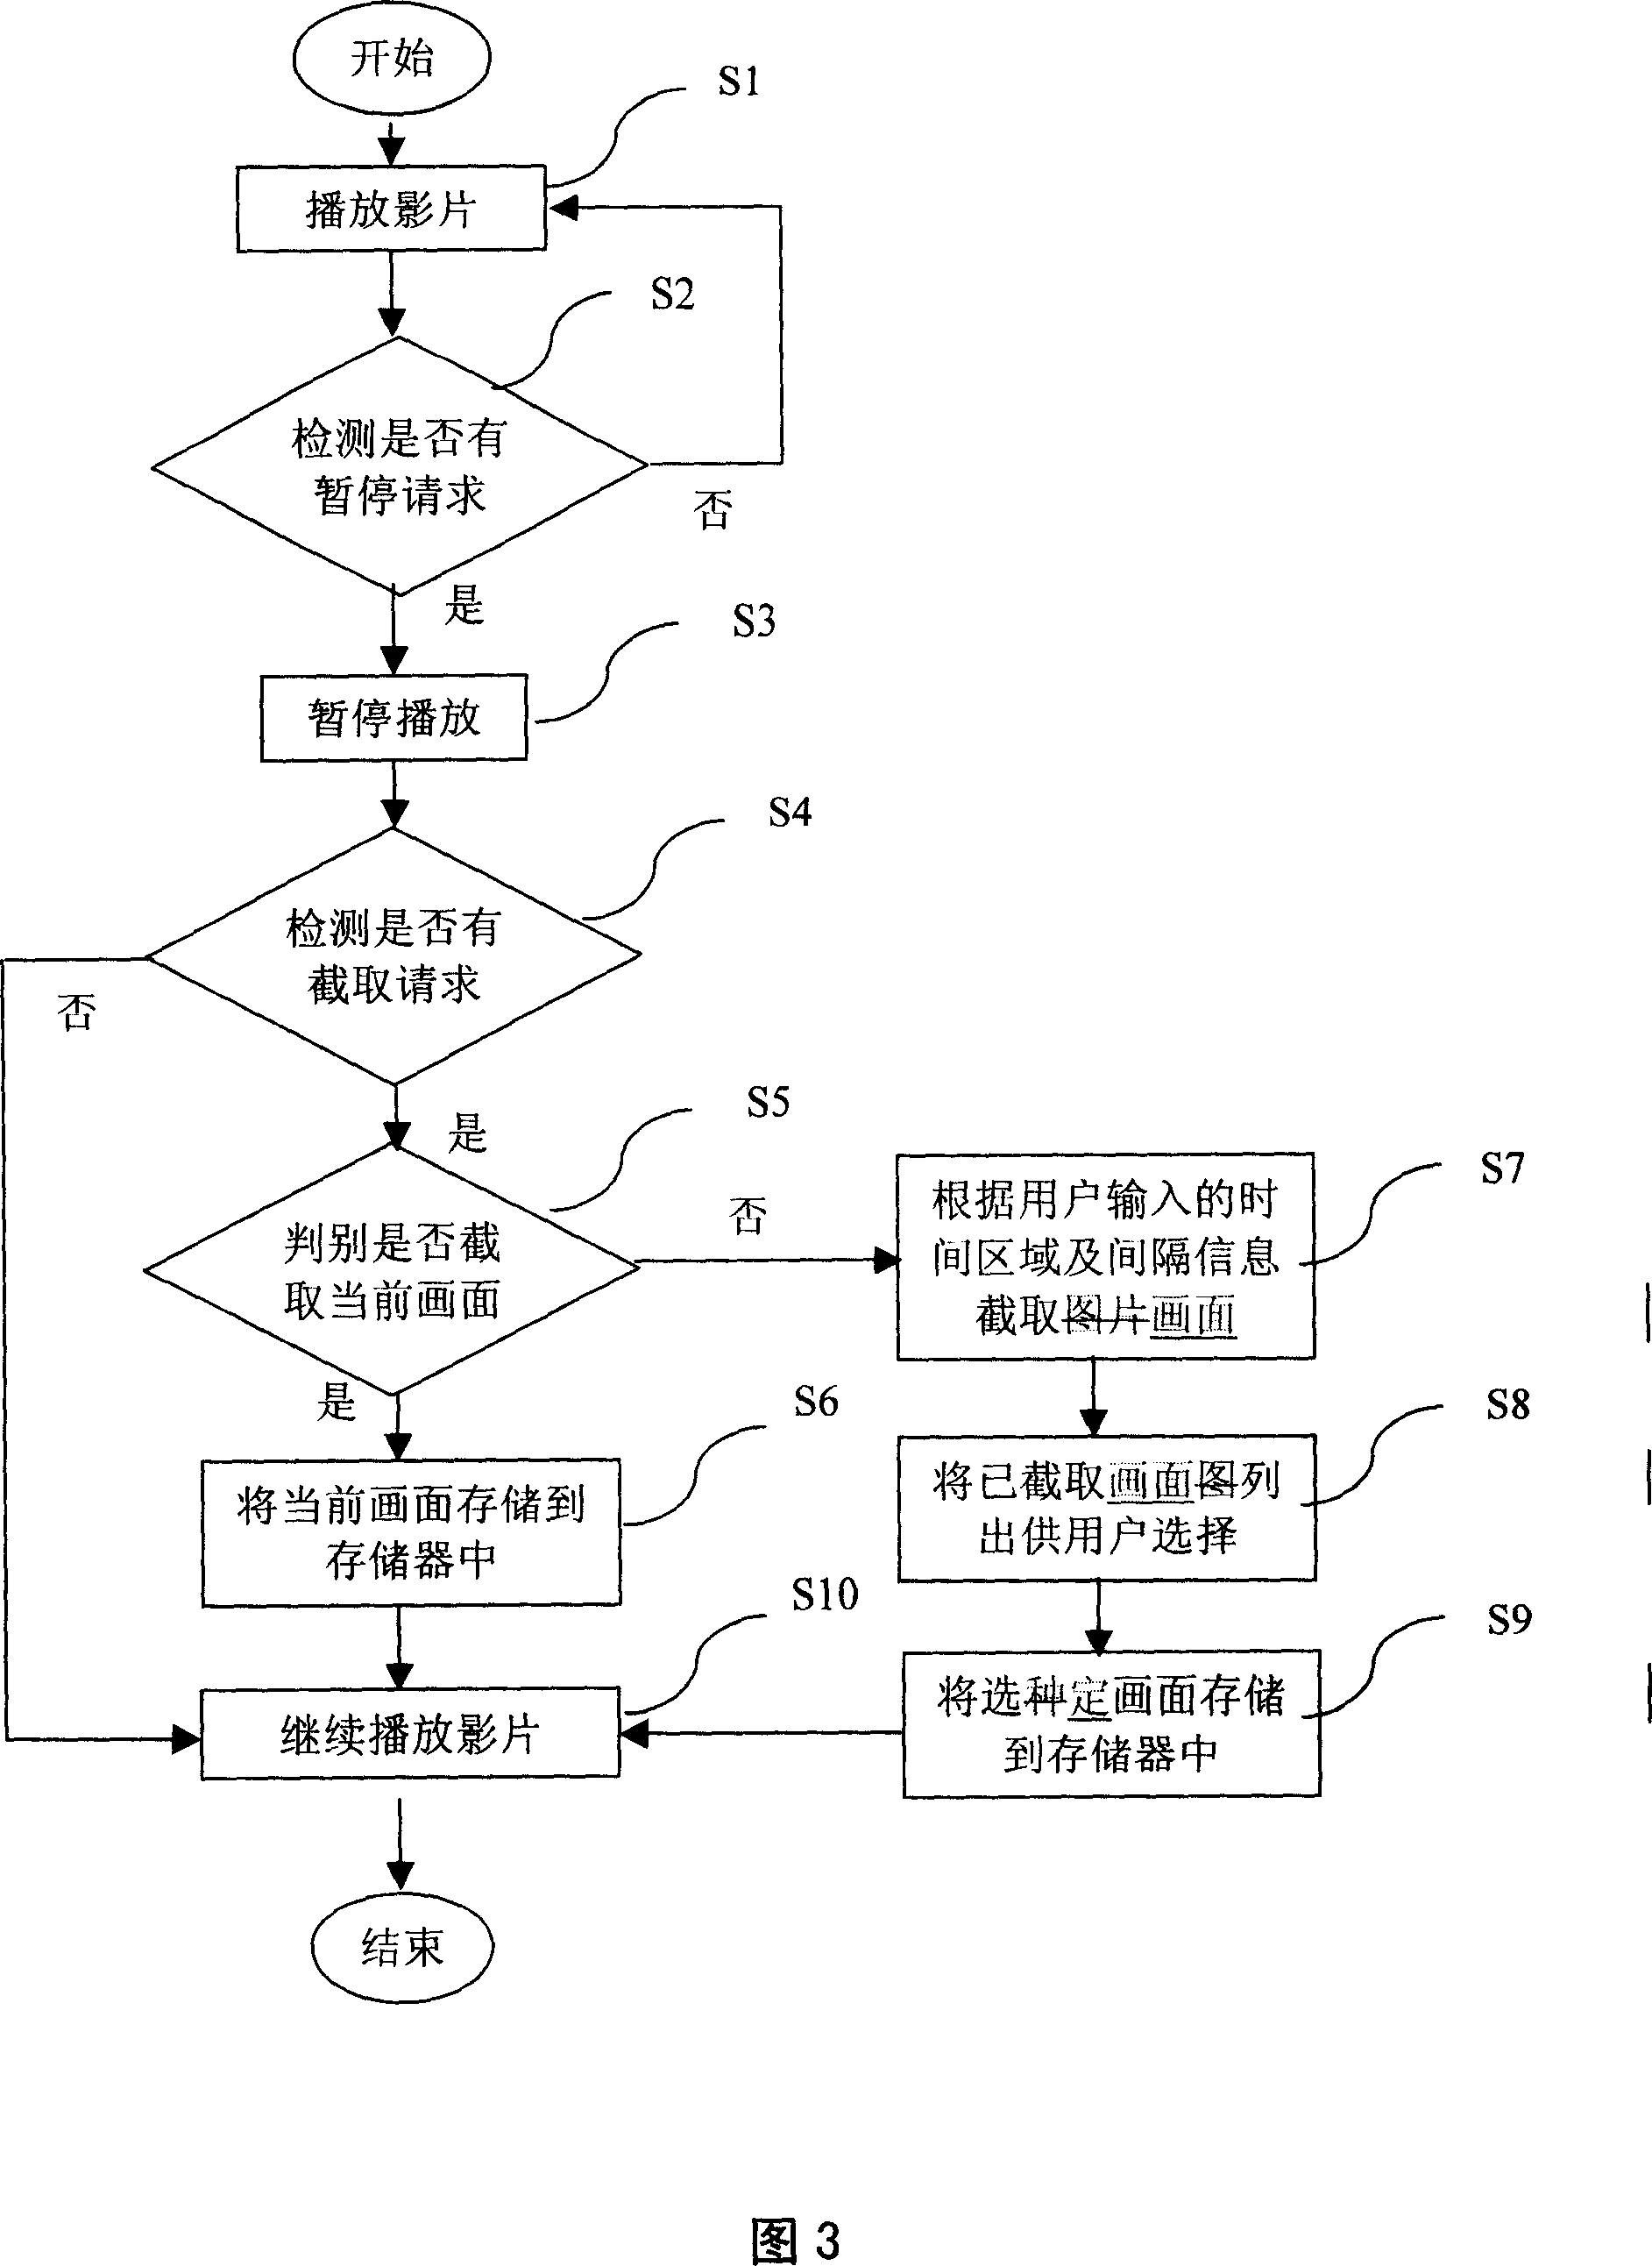 Method for capturing picture in playing process